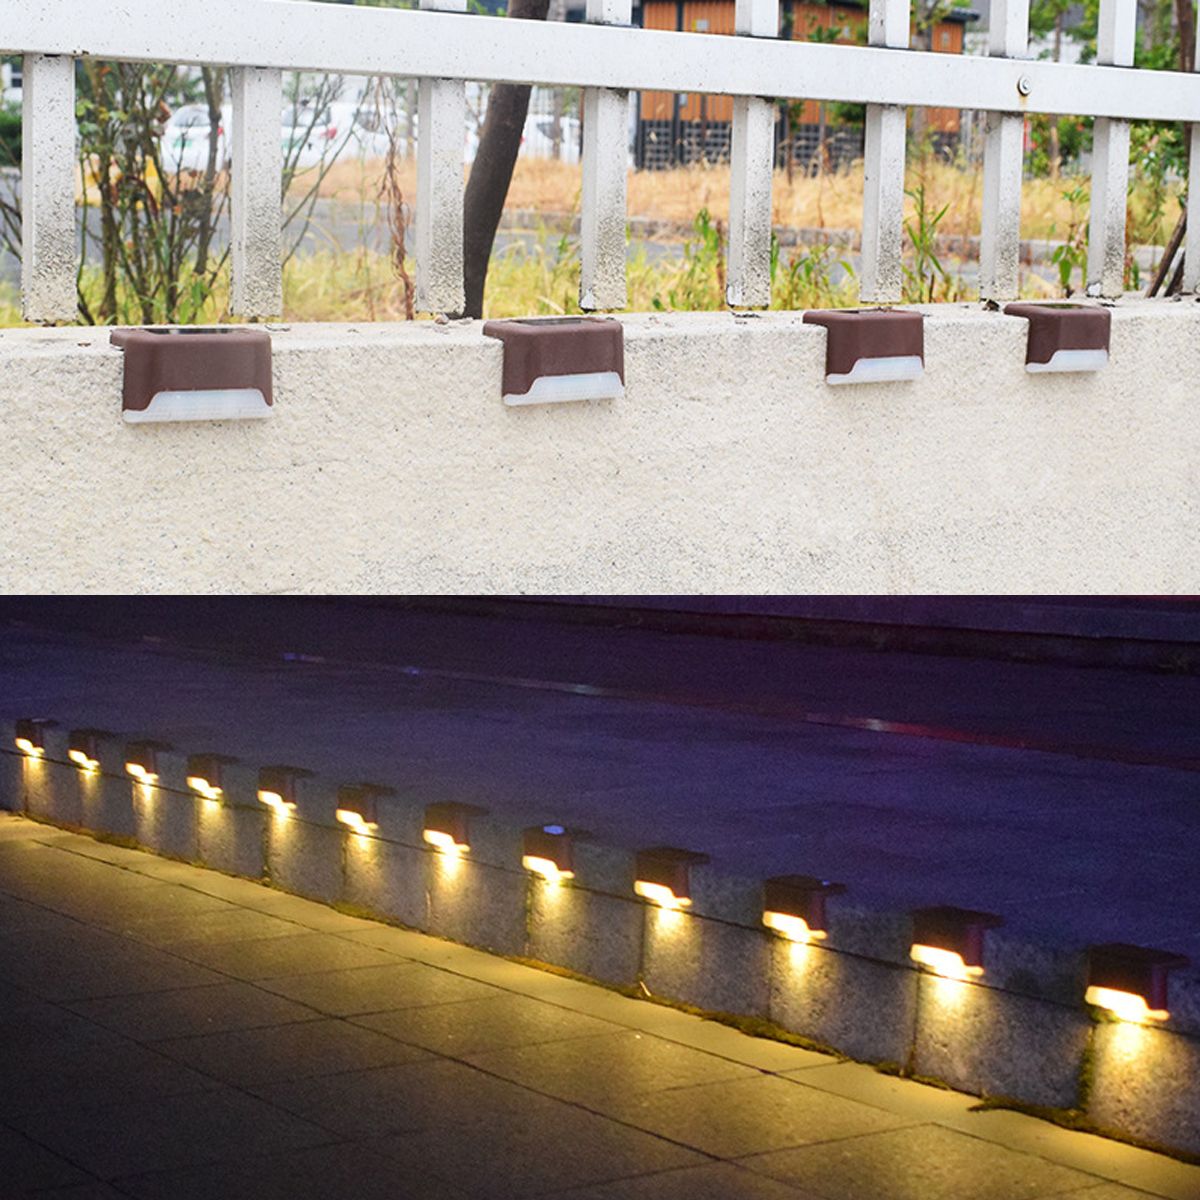 12PCS-Solar-Powered-LED-Stairs-Step-Fence-Lights-Deck-Bed-Outdoor-Path-1689908